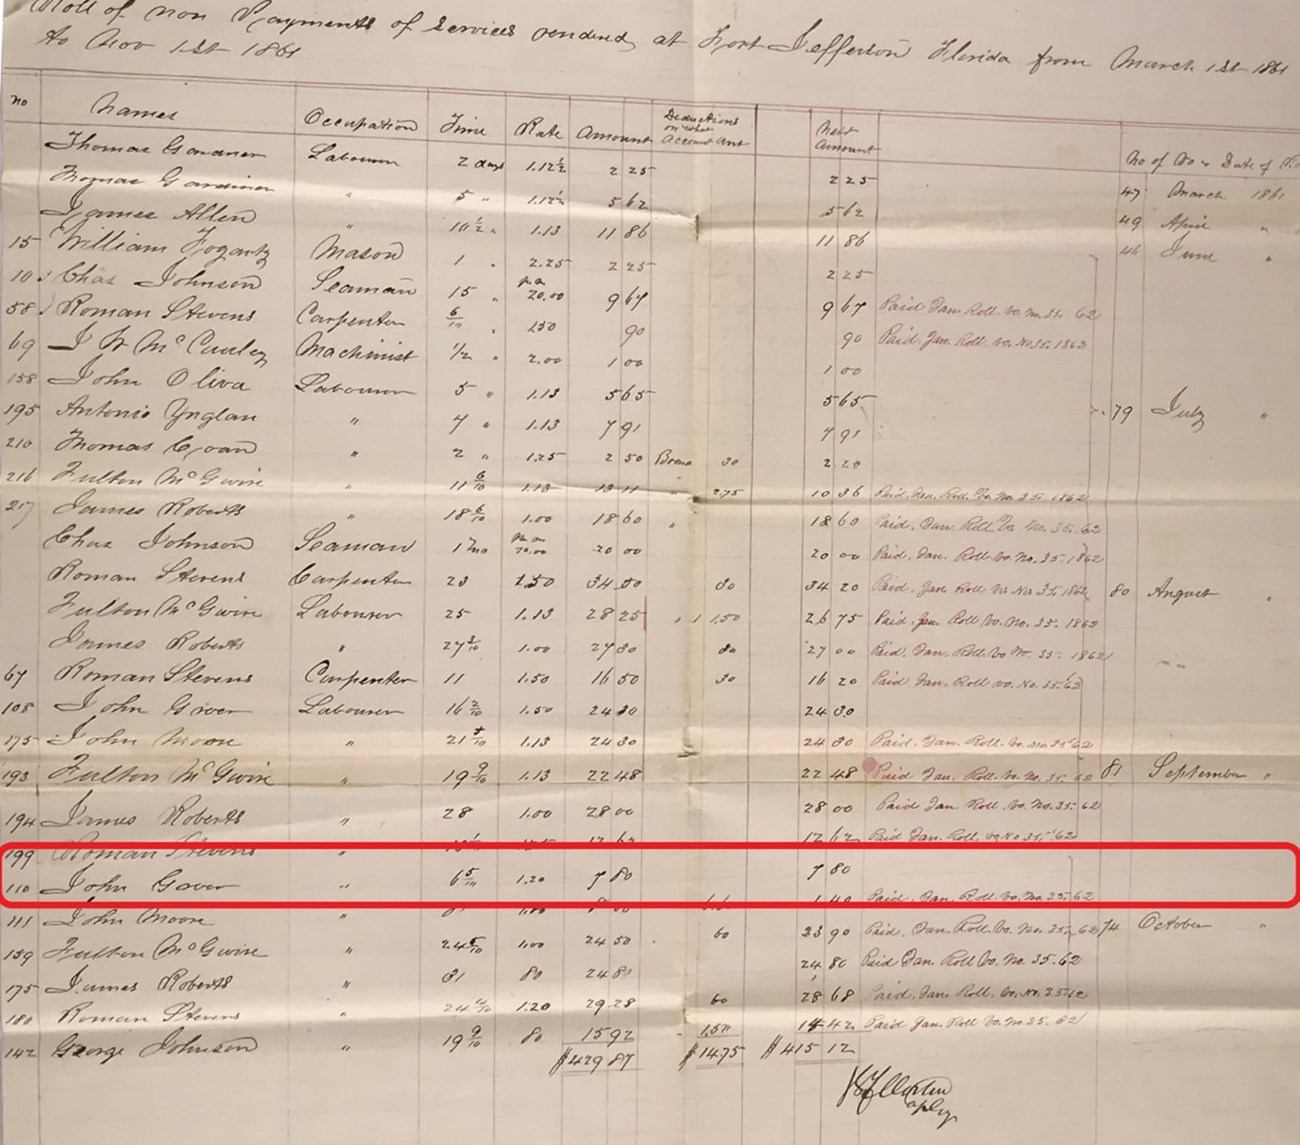 A handwritten log of names, occupation and other details with John Greer's entry highlighted